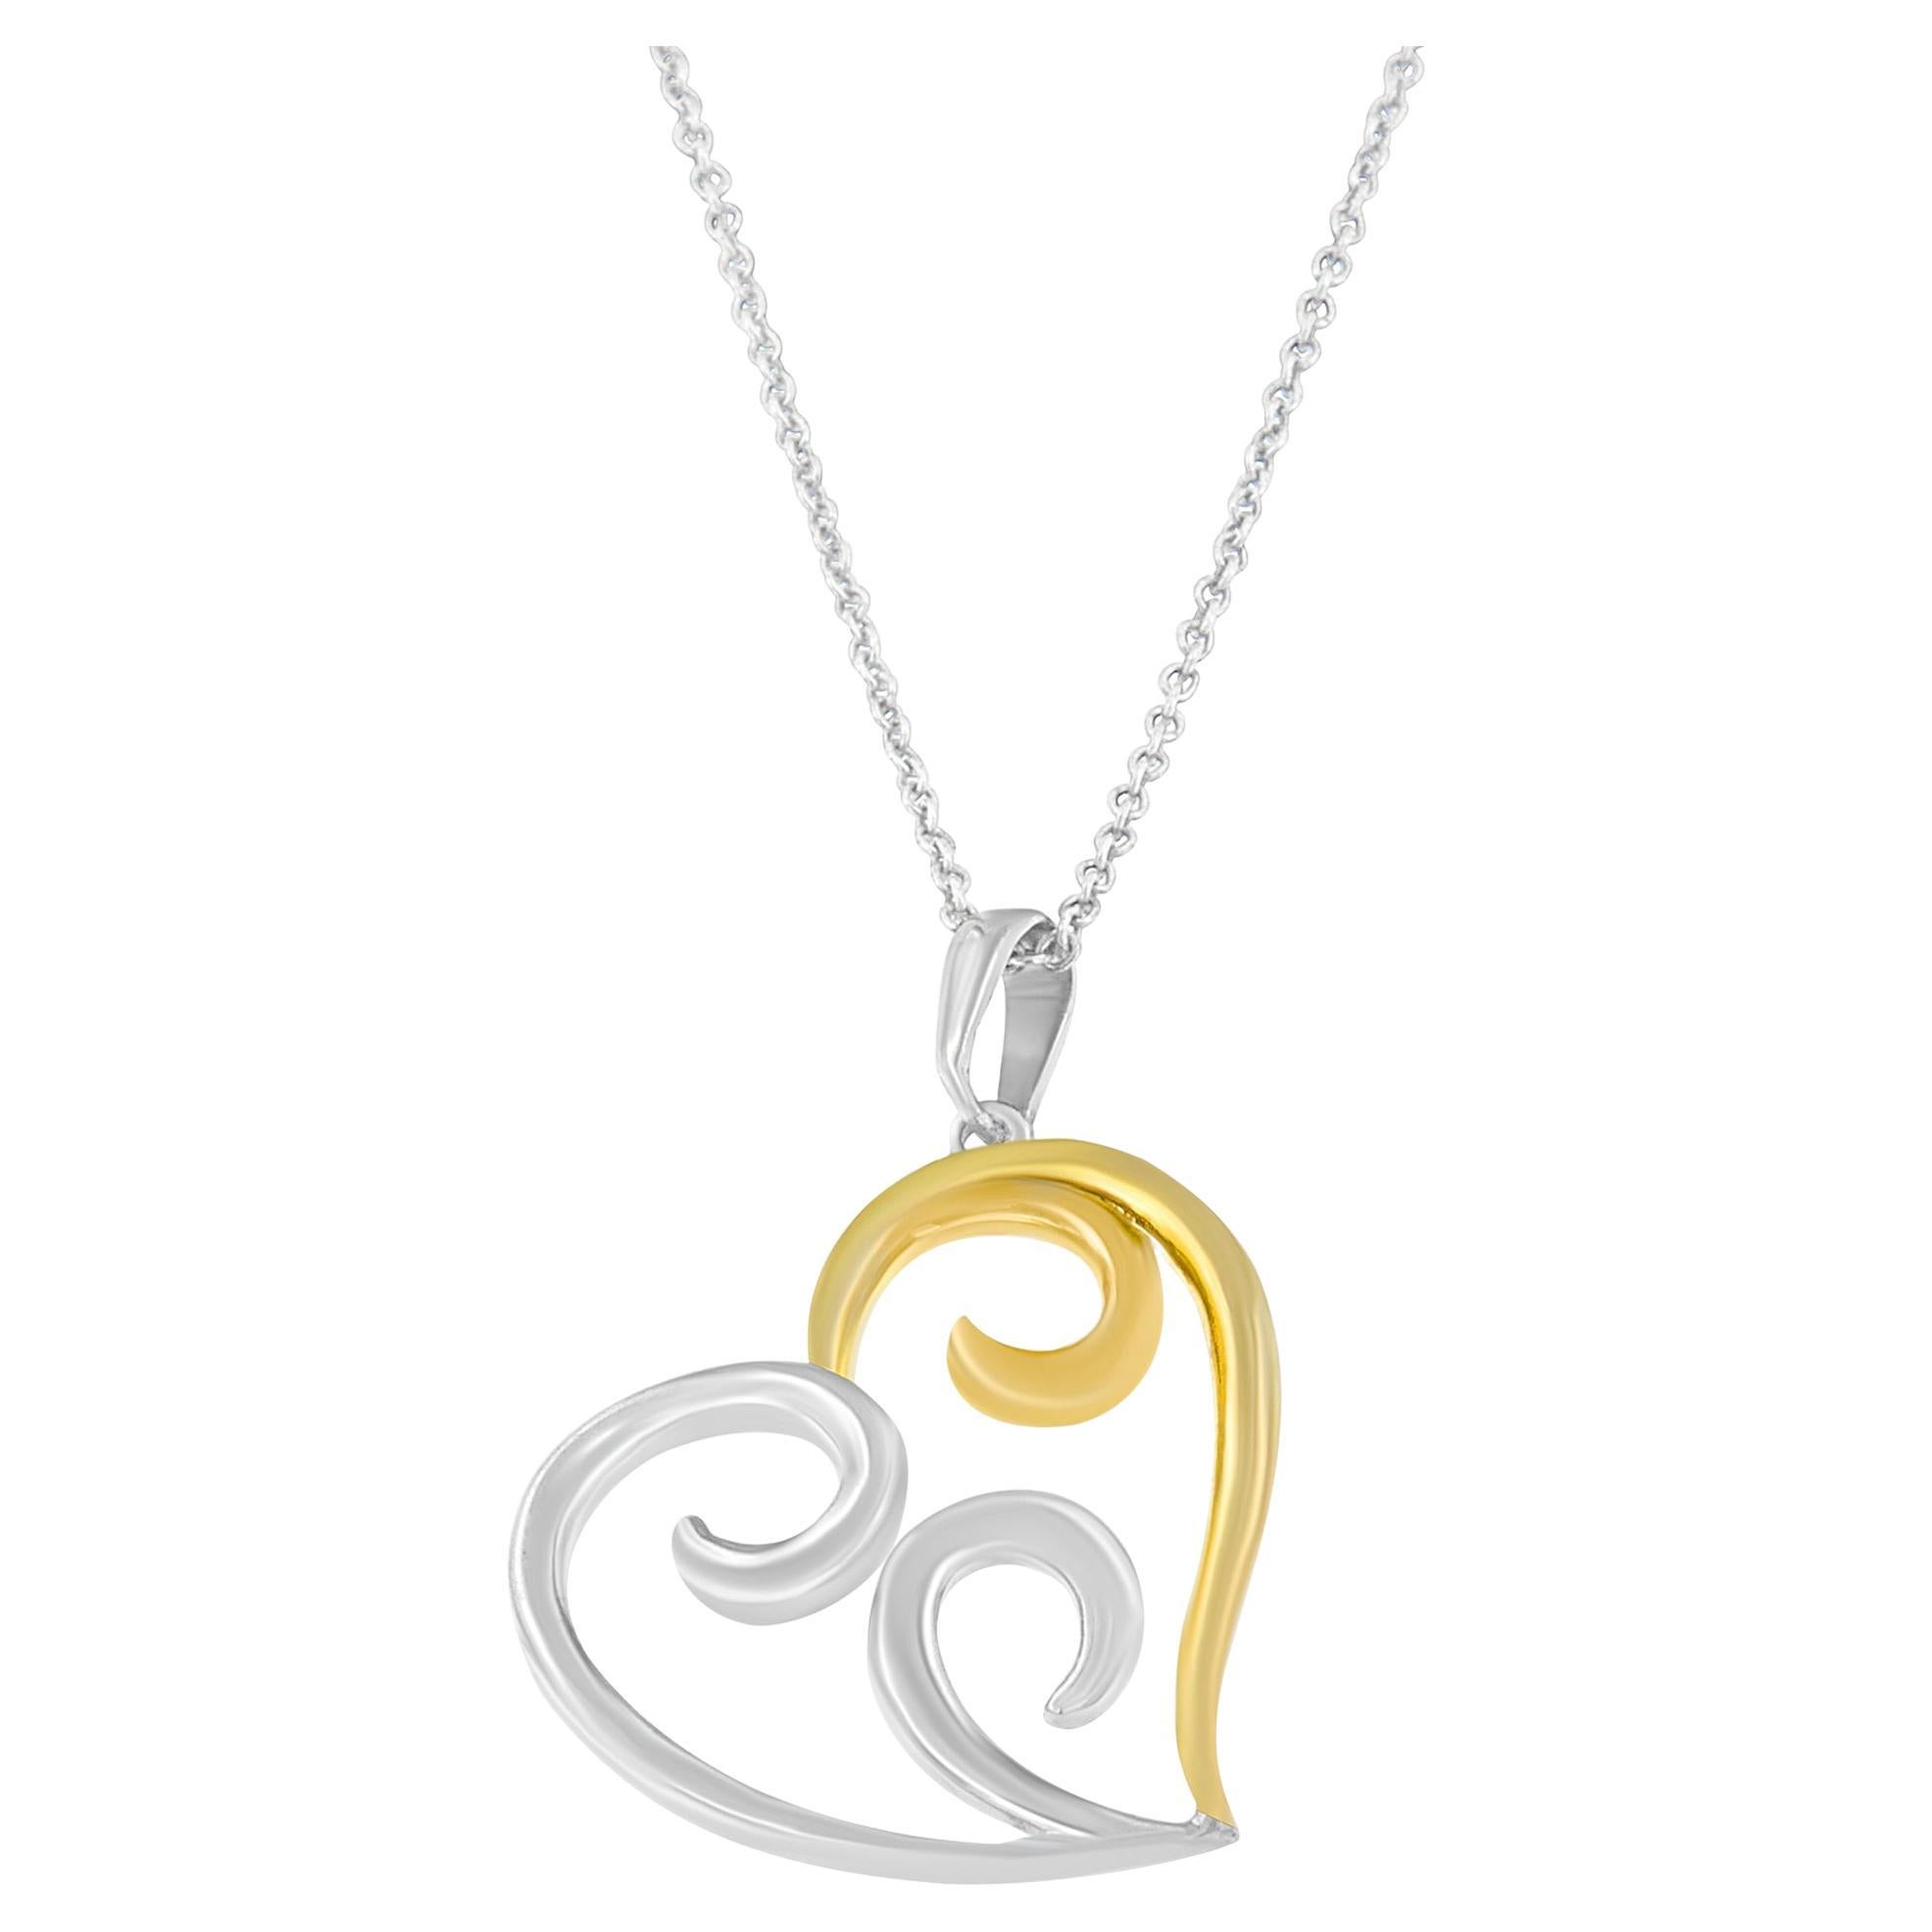 10K Yellow Gold Over Silver Open Heart with Swirls Box Chain Pendant Necklace